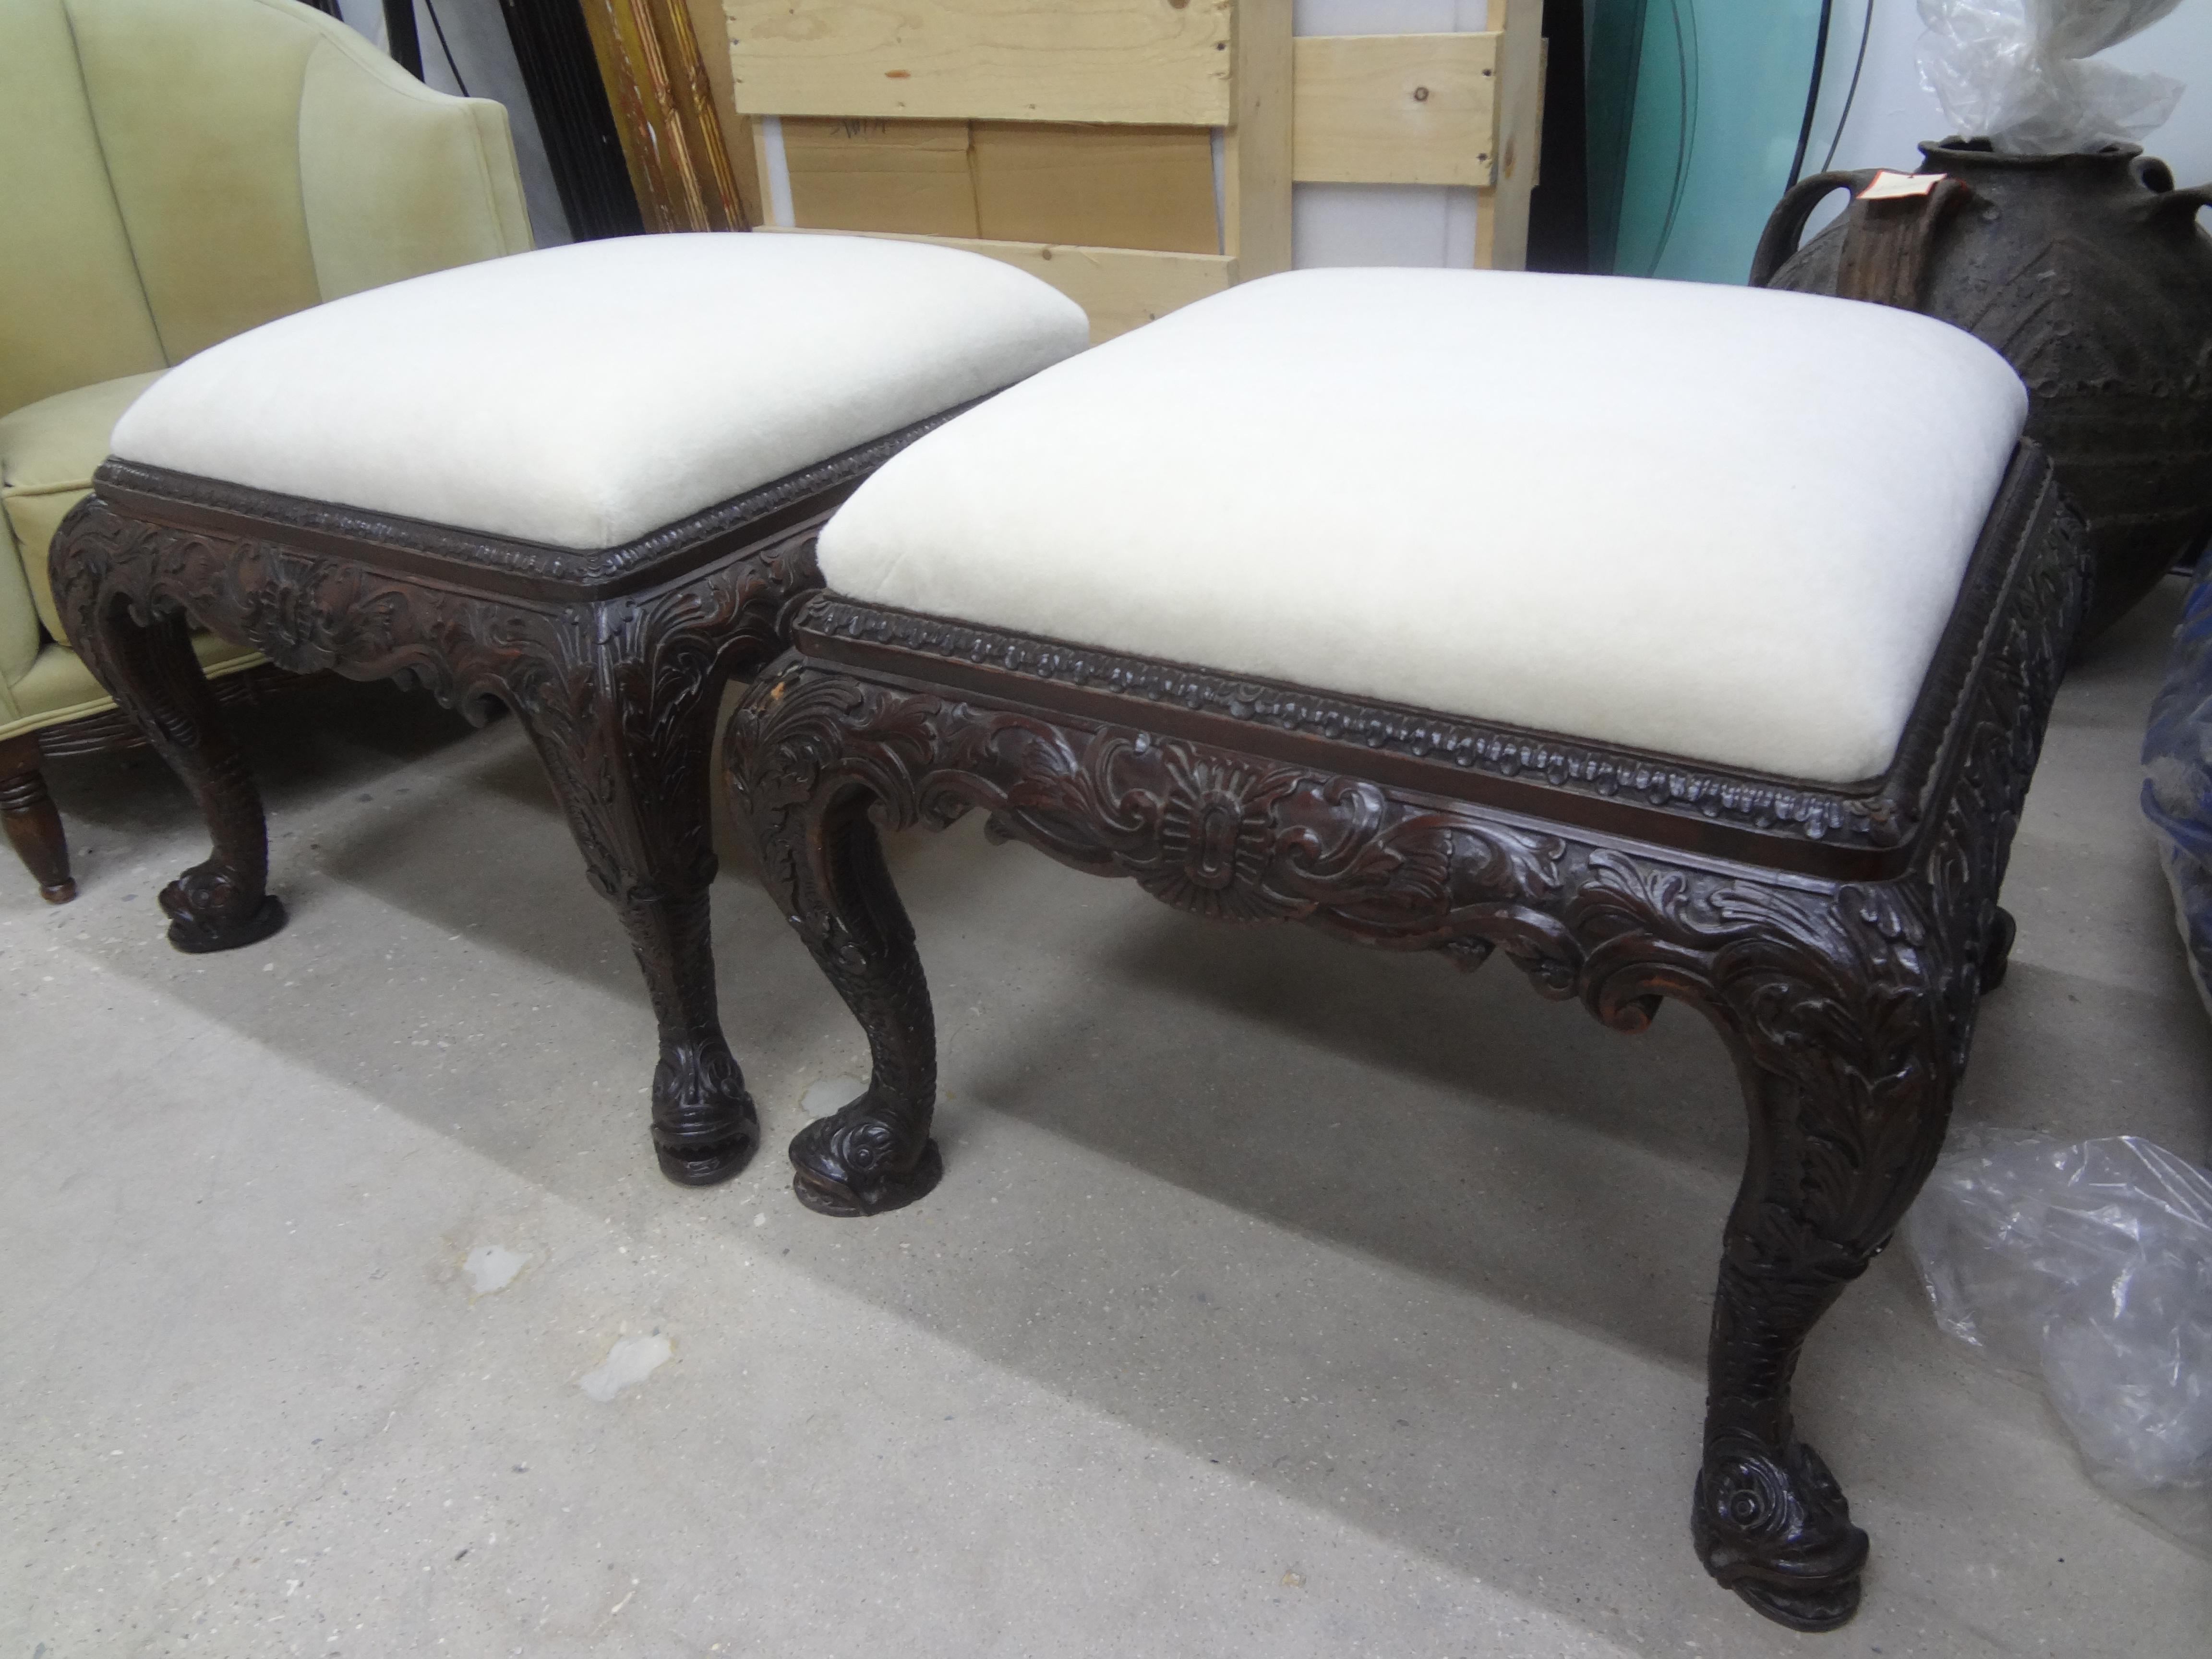 Pair of Large Scale Antique English Regency Style Ottomans with Dolphin Feet For Sale 4